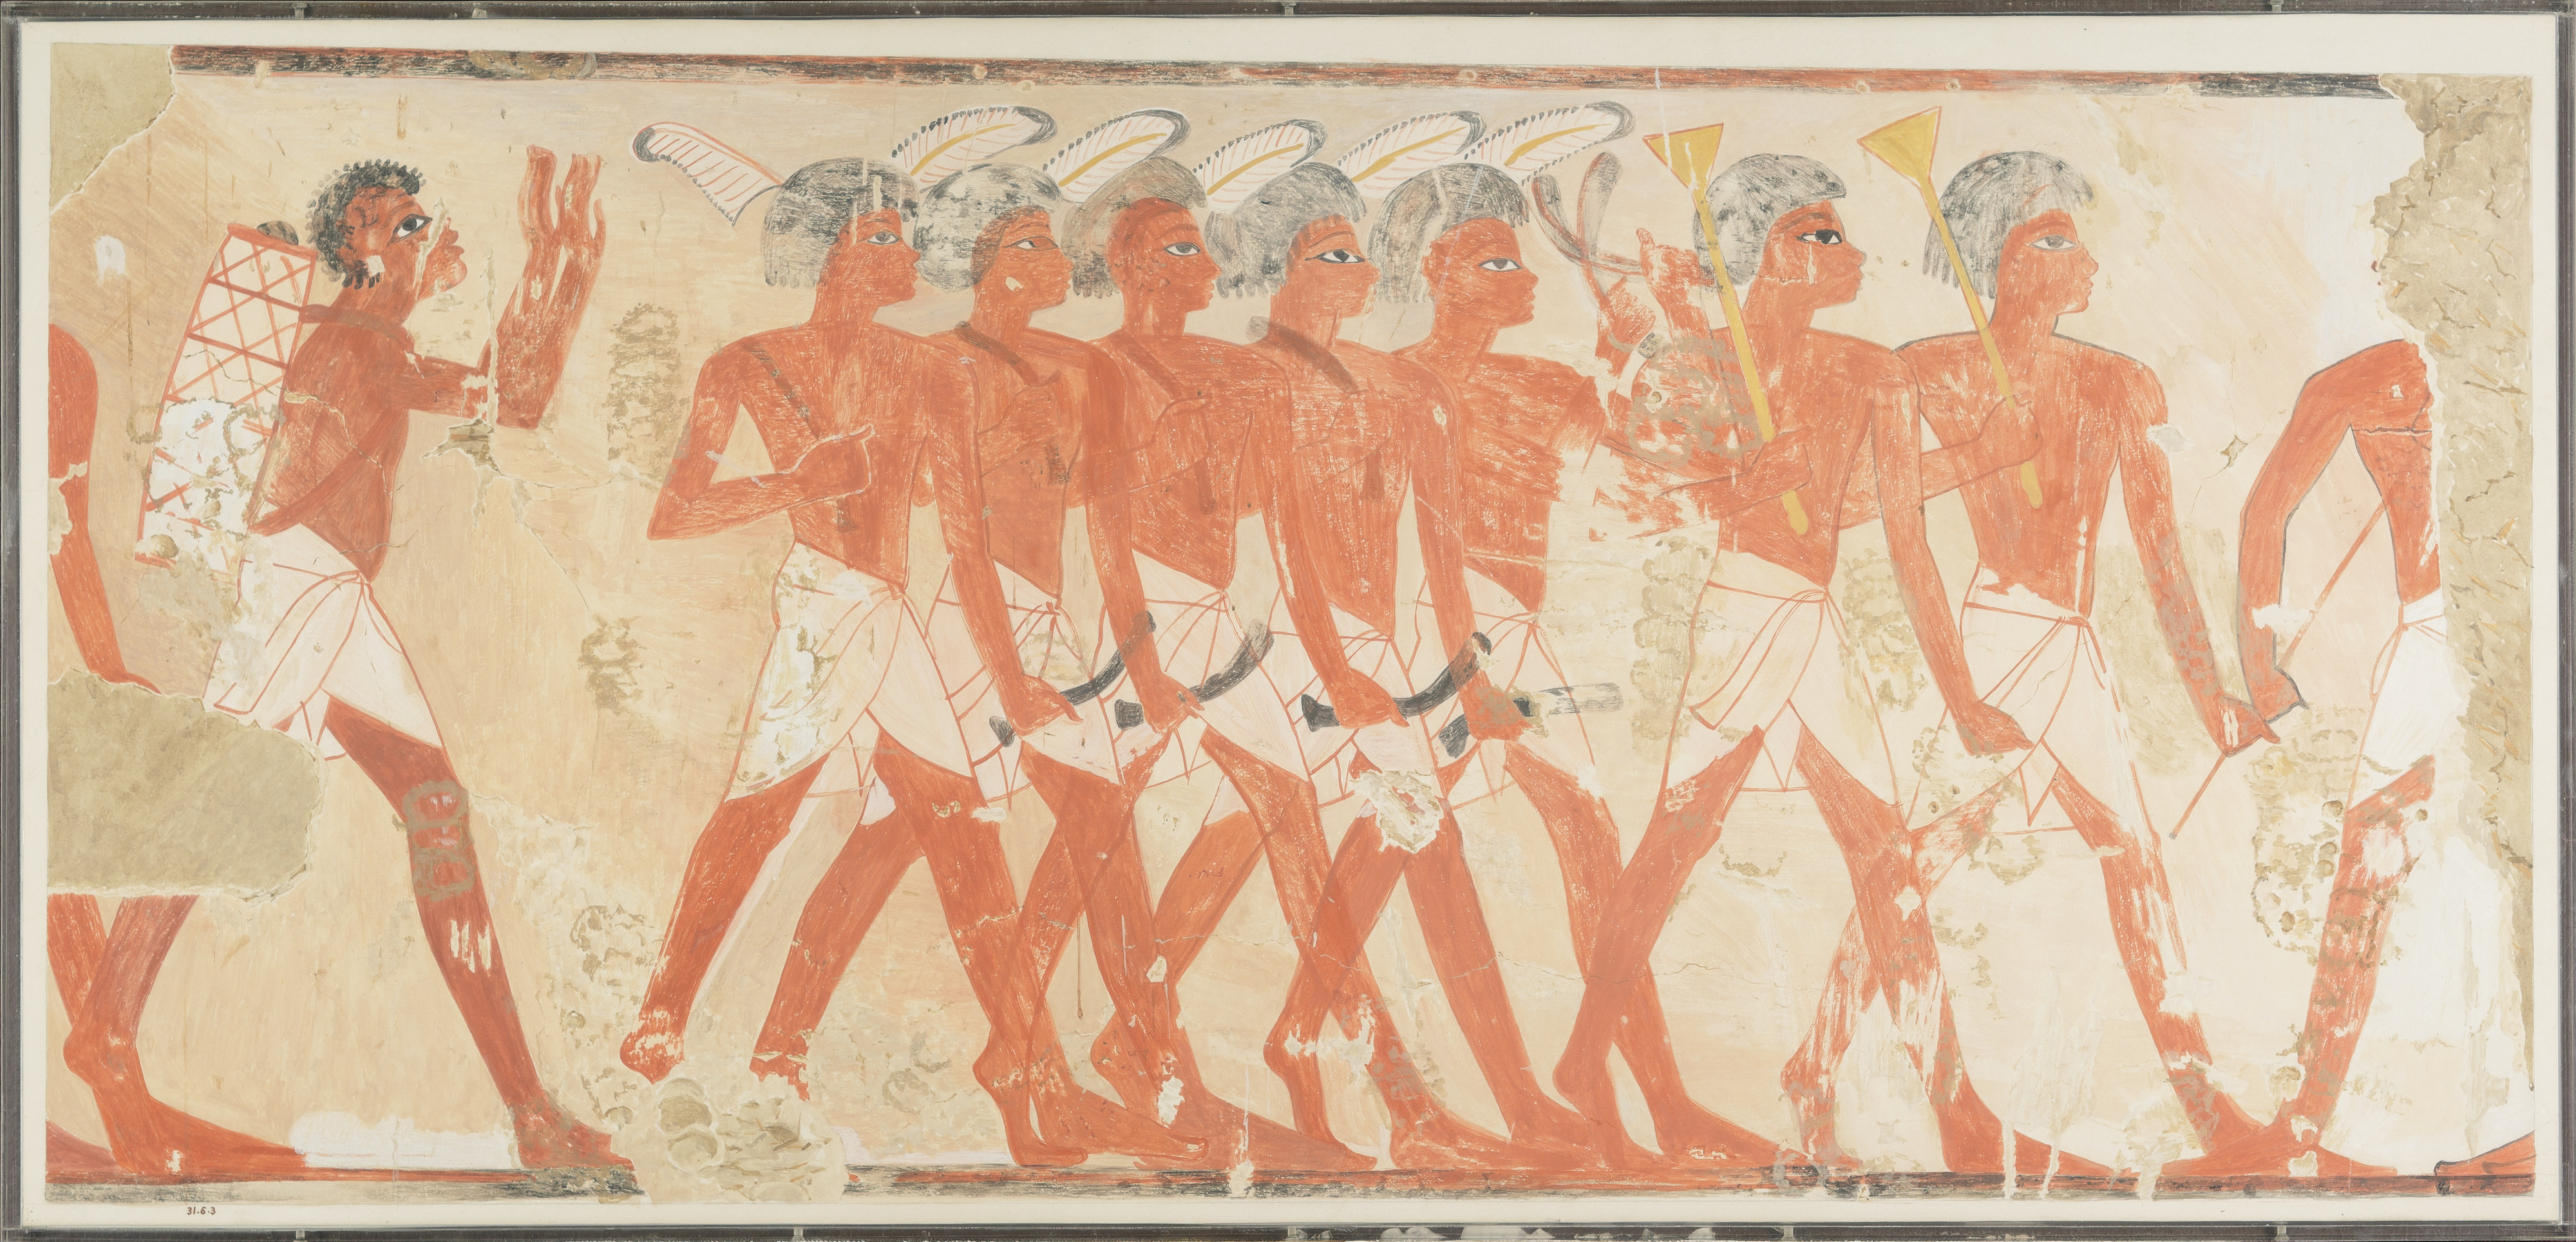 Nina De Garis Davies Military Musicians Showing Nubian And Egyptian Styles New Kingdom The